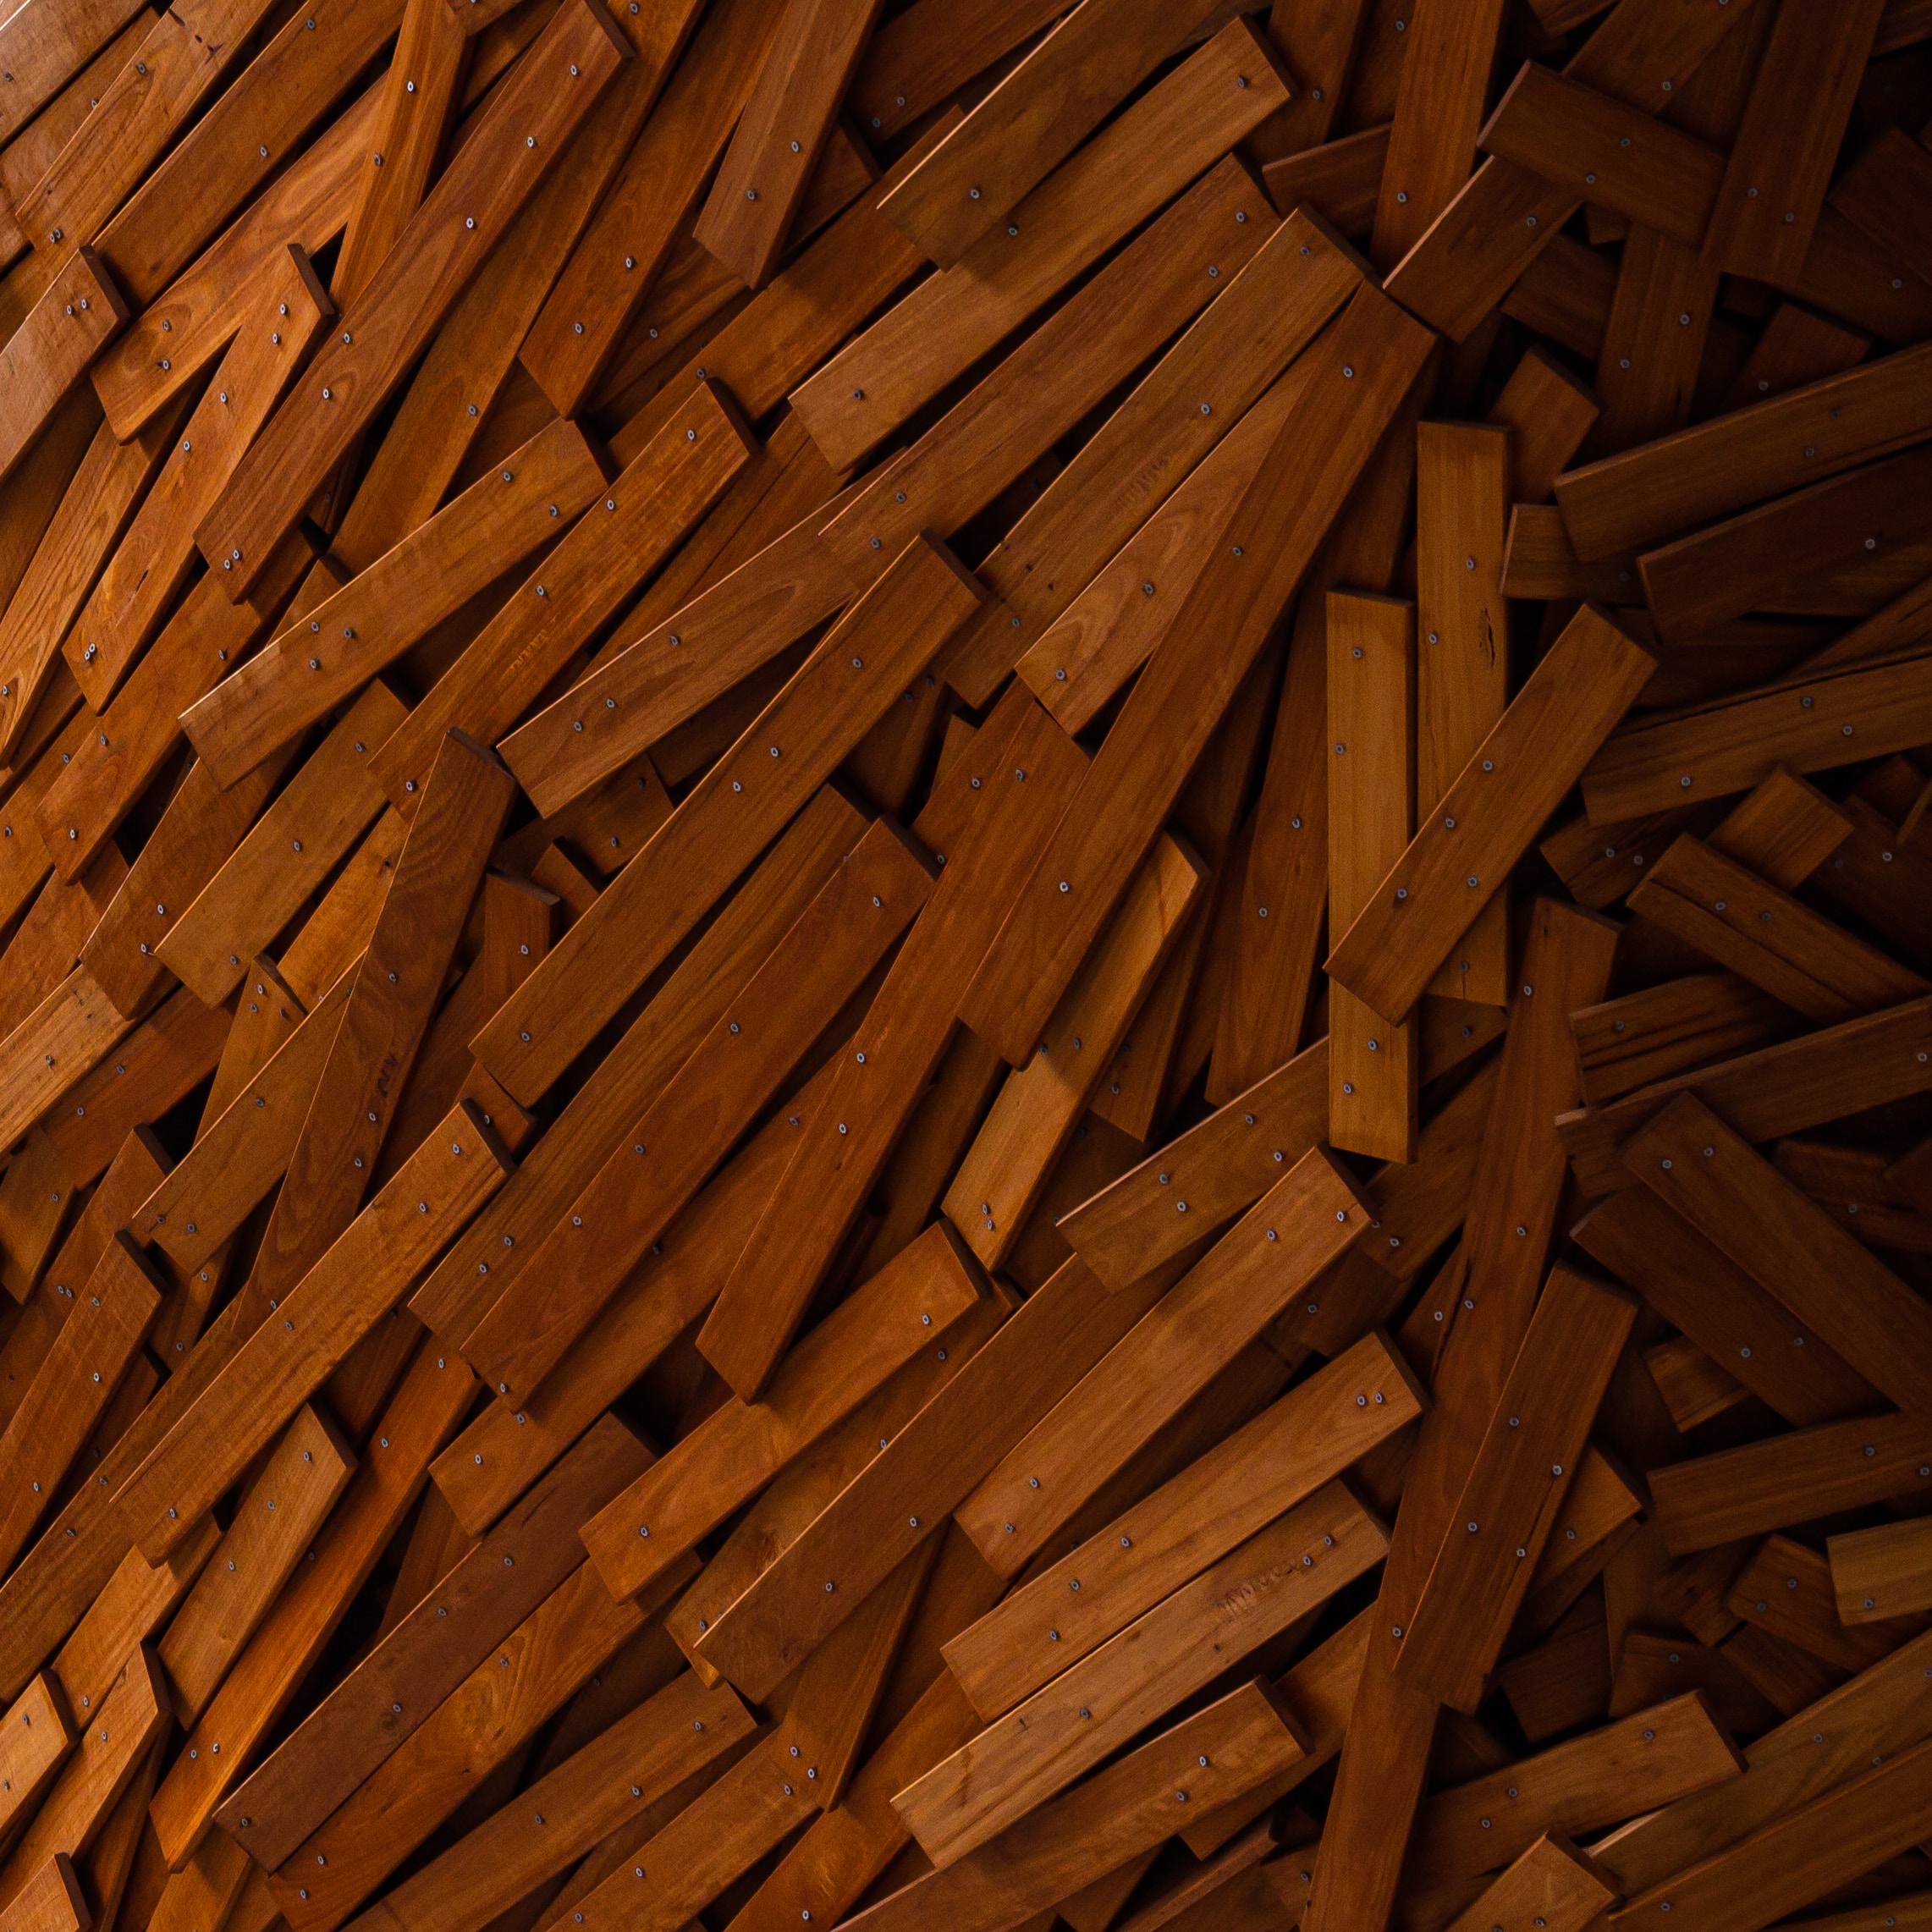 wood, wooden, texture, textures, brown, planks, strips cellphone